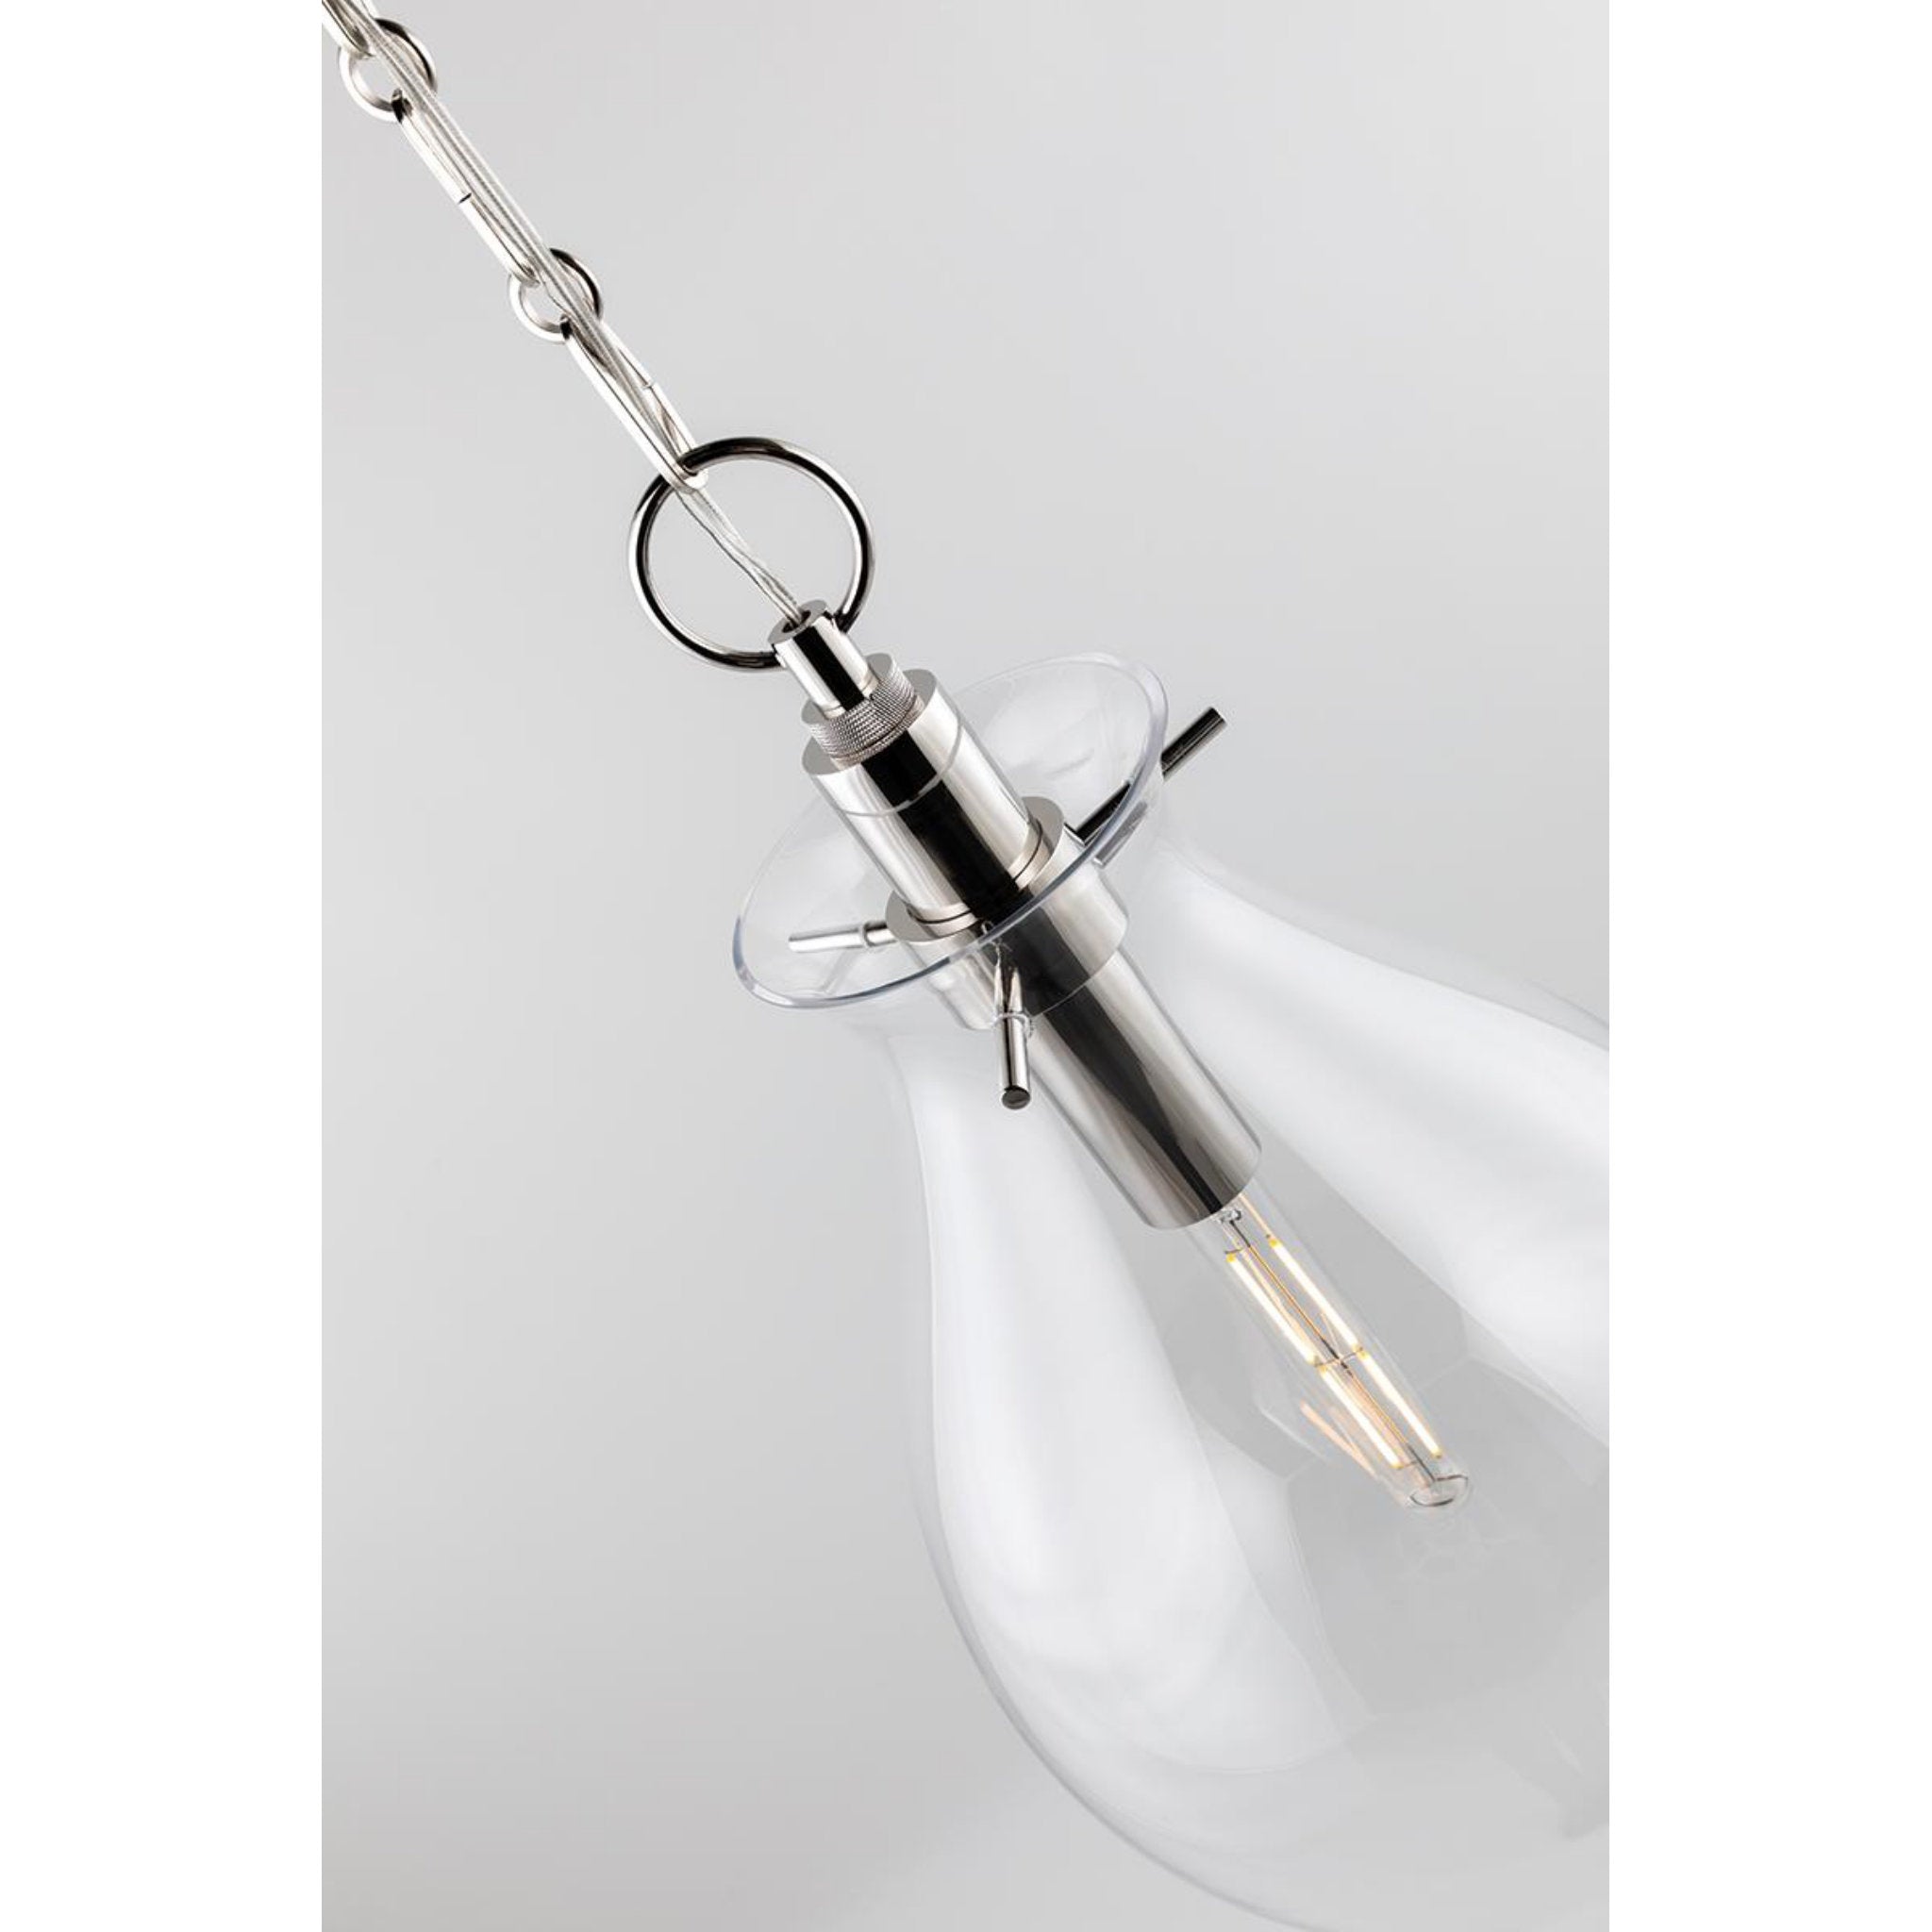 Ivy 1 Light Pendant in Polished Nickel by Becki Owens